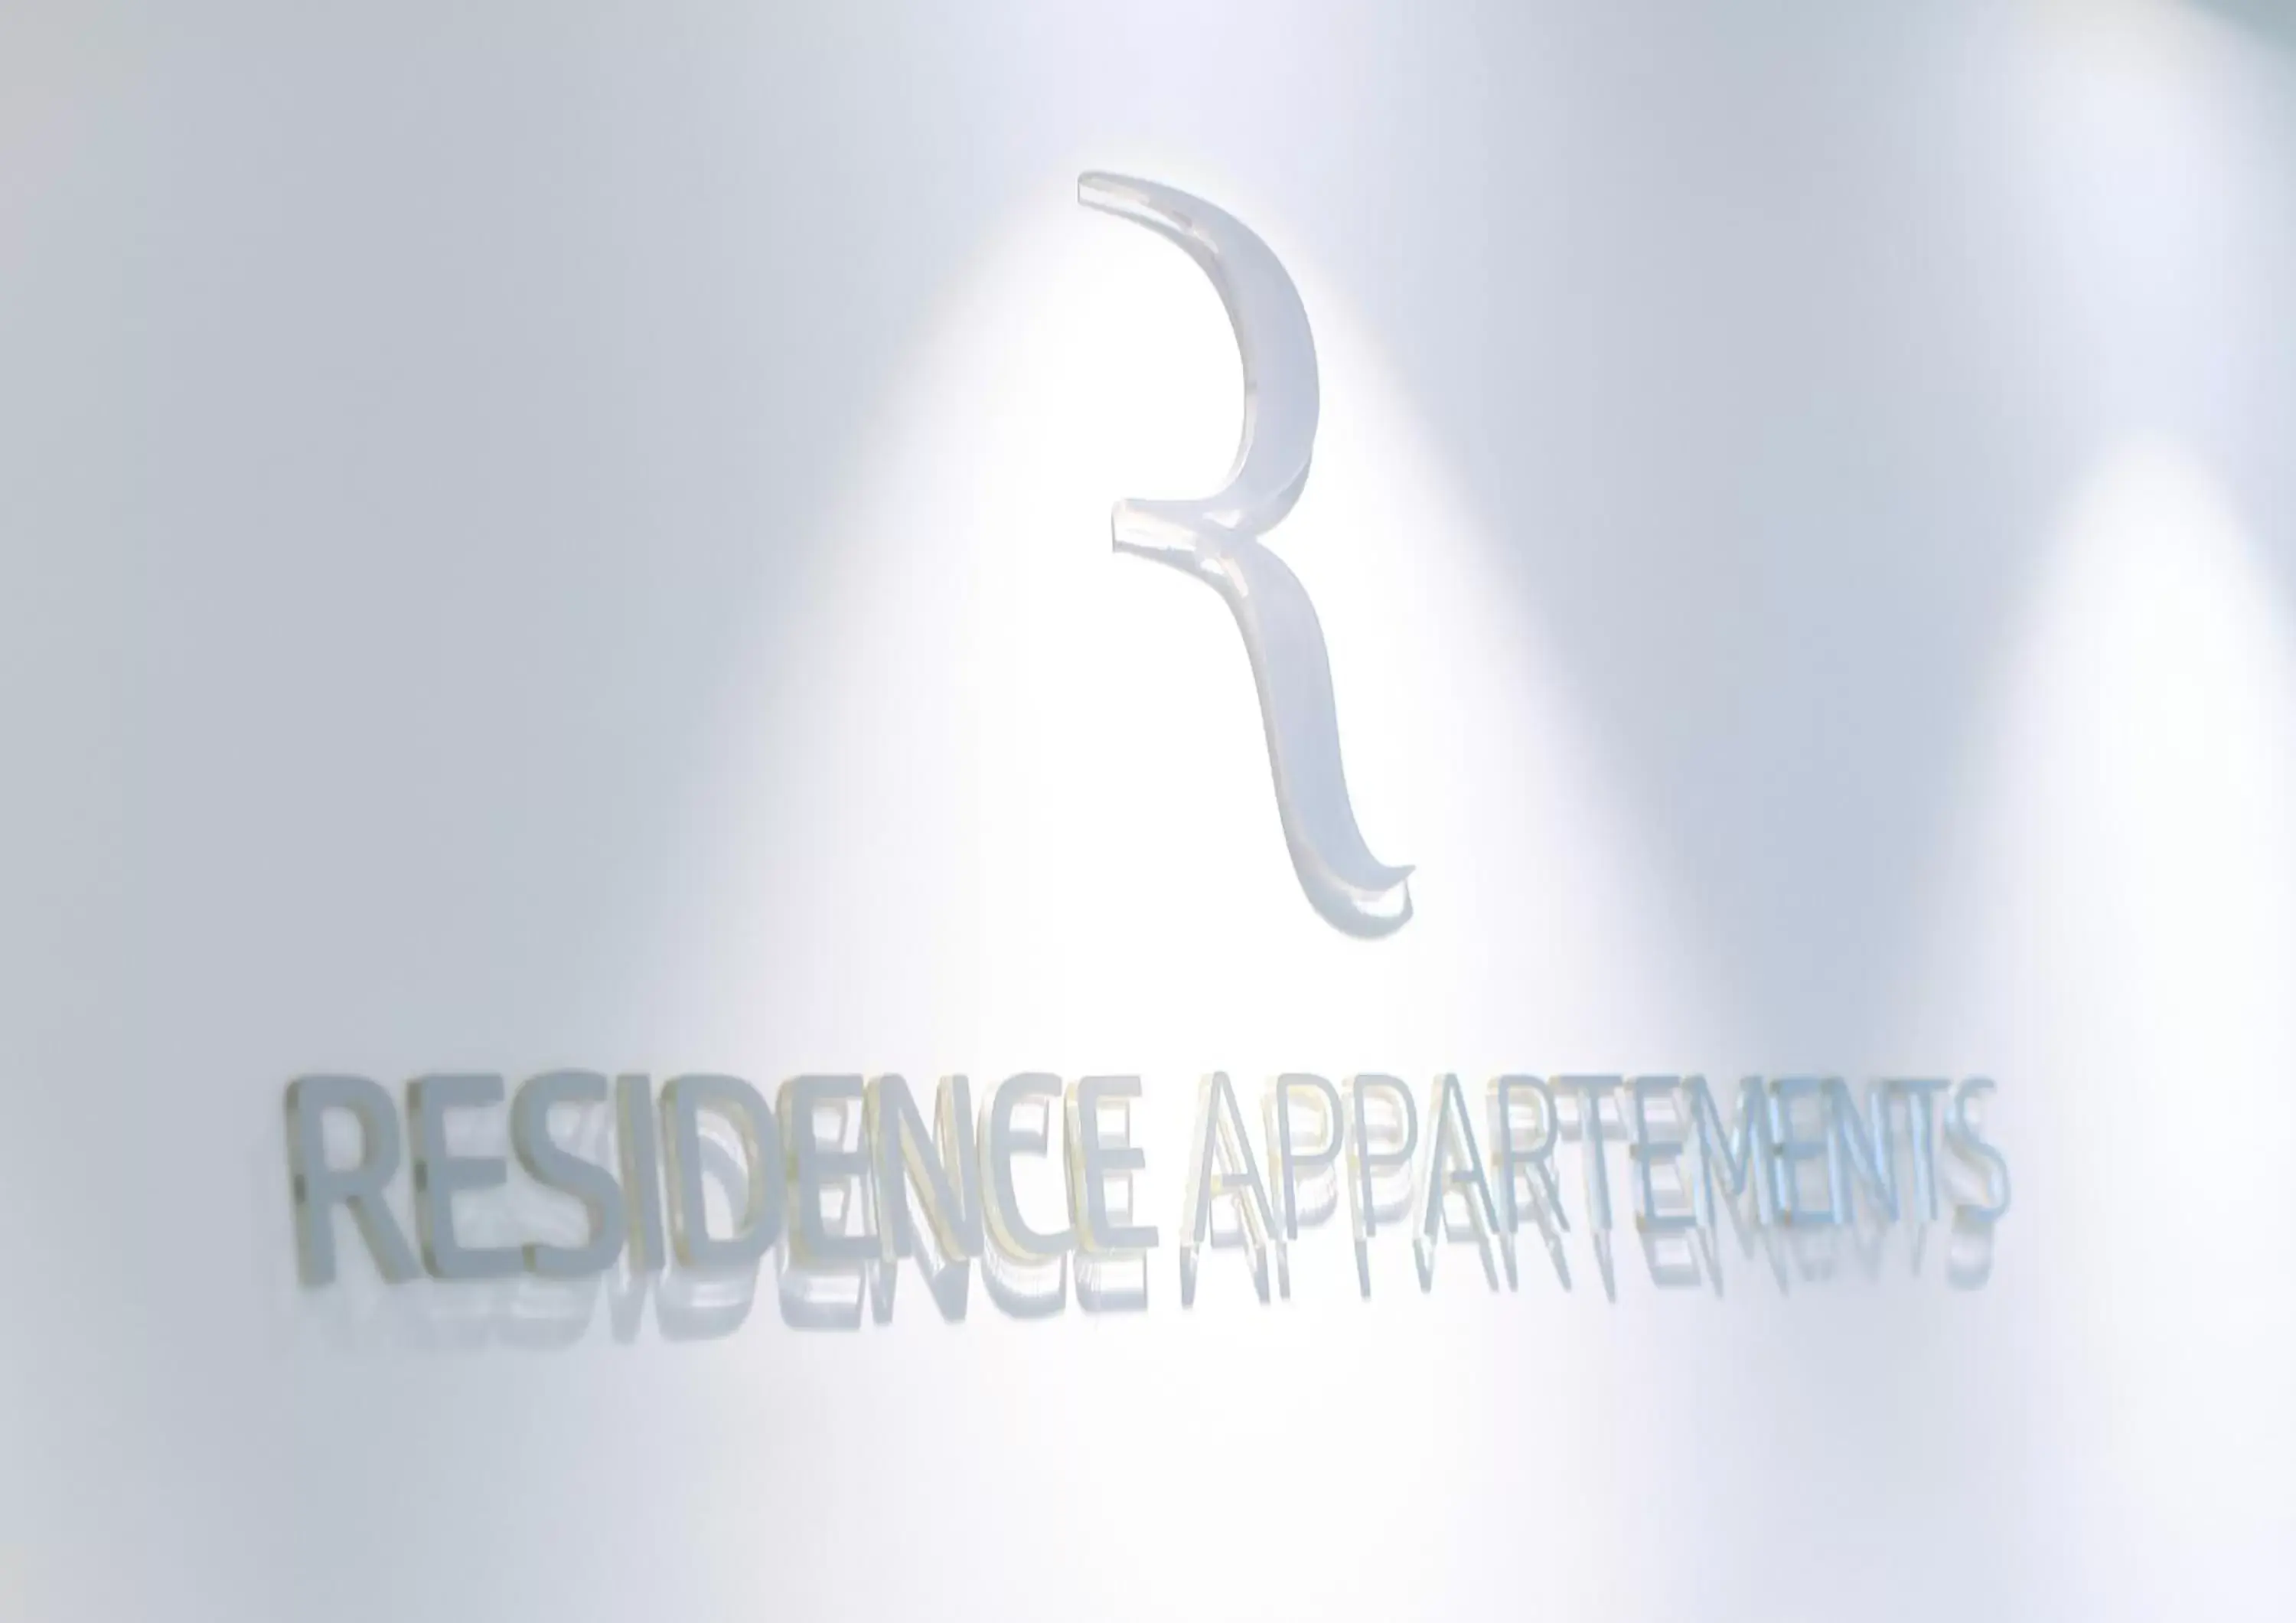 Property logo or sign, Property Logo/Sign in Residence Appartements